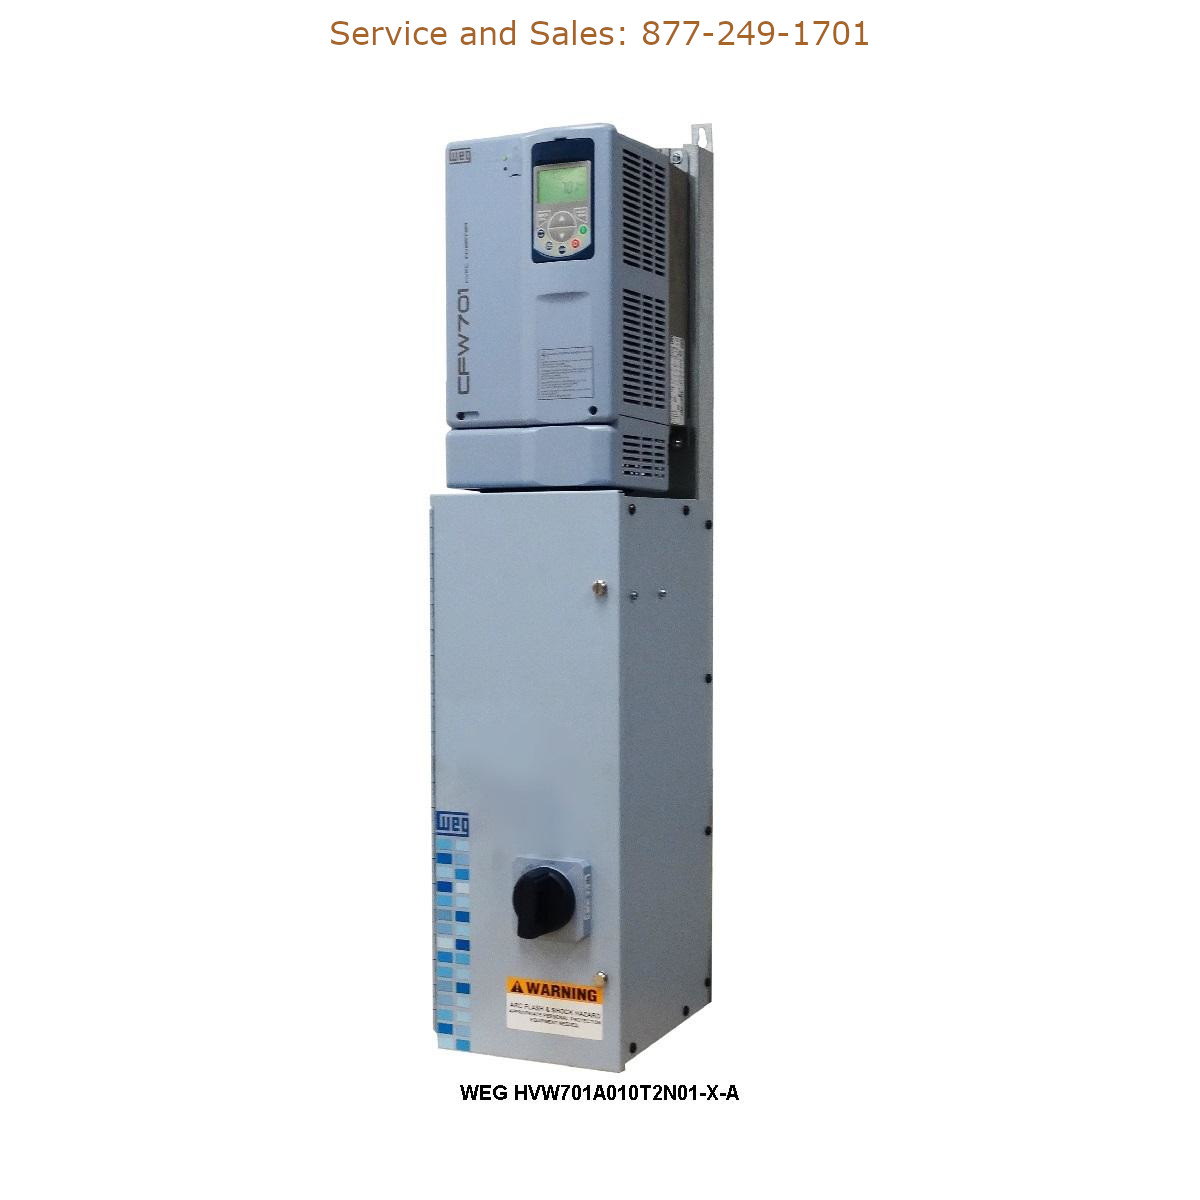 WEG HVW701A010T2N01-X-A WEG Model Number HVW701A010T2N01-X-A WEG Drives, Variable Speed Drives Repair Service, Troubleshooting, Replacement Parts https://gesrepair.com/wp-content/uploads/2022/WEG/WEG_HVW701A010T2N01-X-A_Drives_Variable_Speed_Drives.jpg